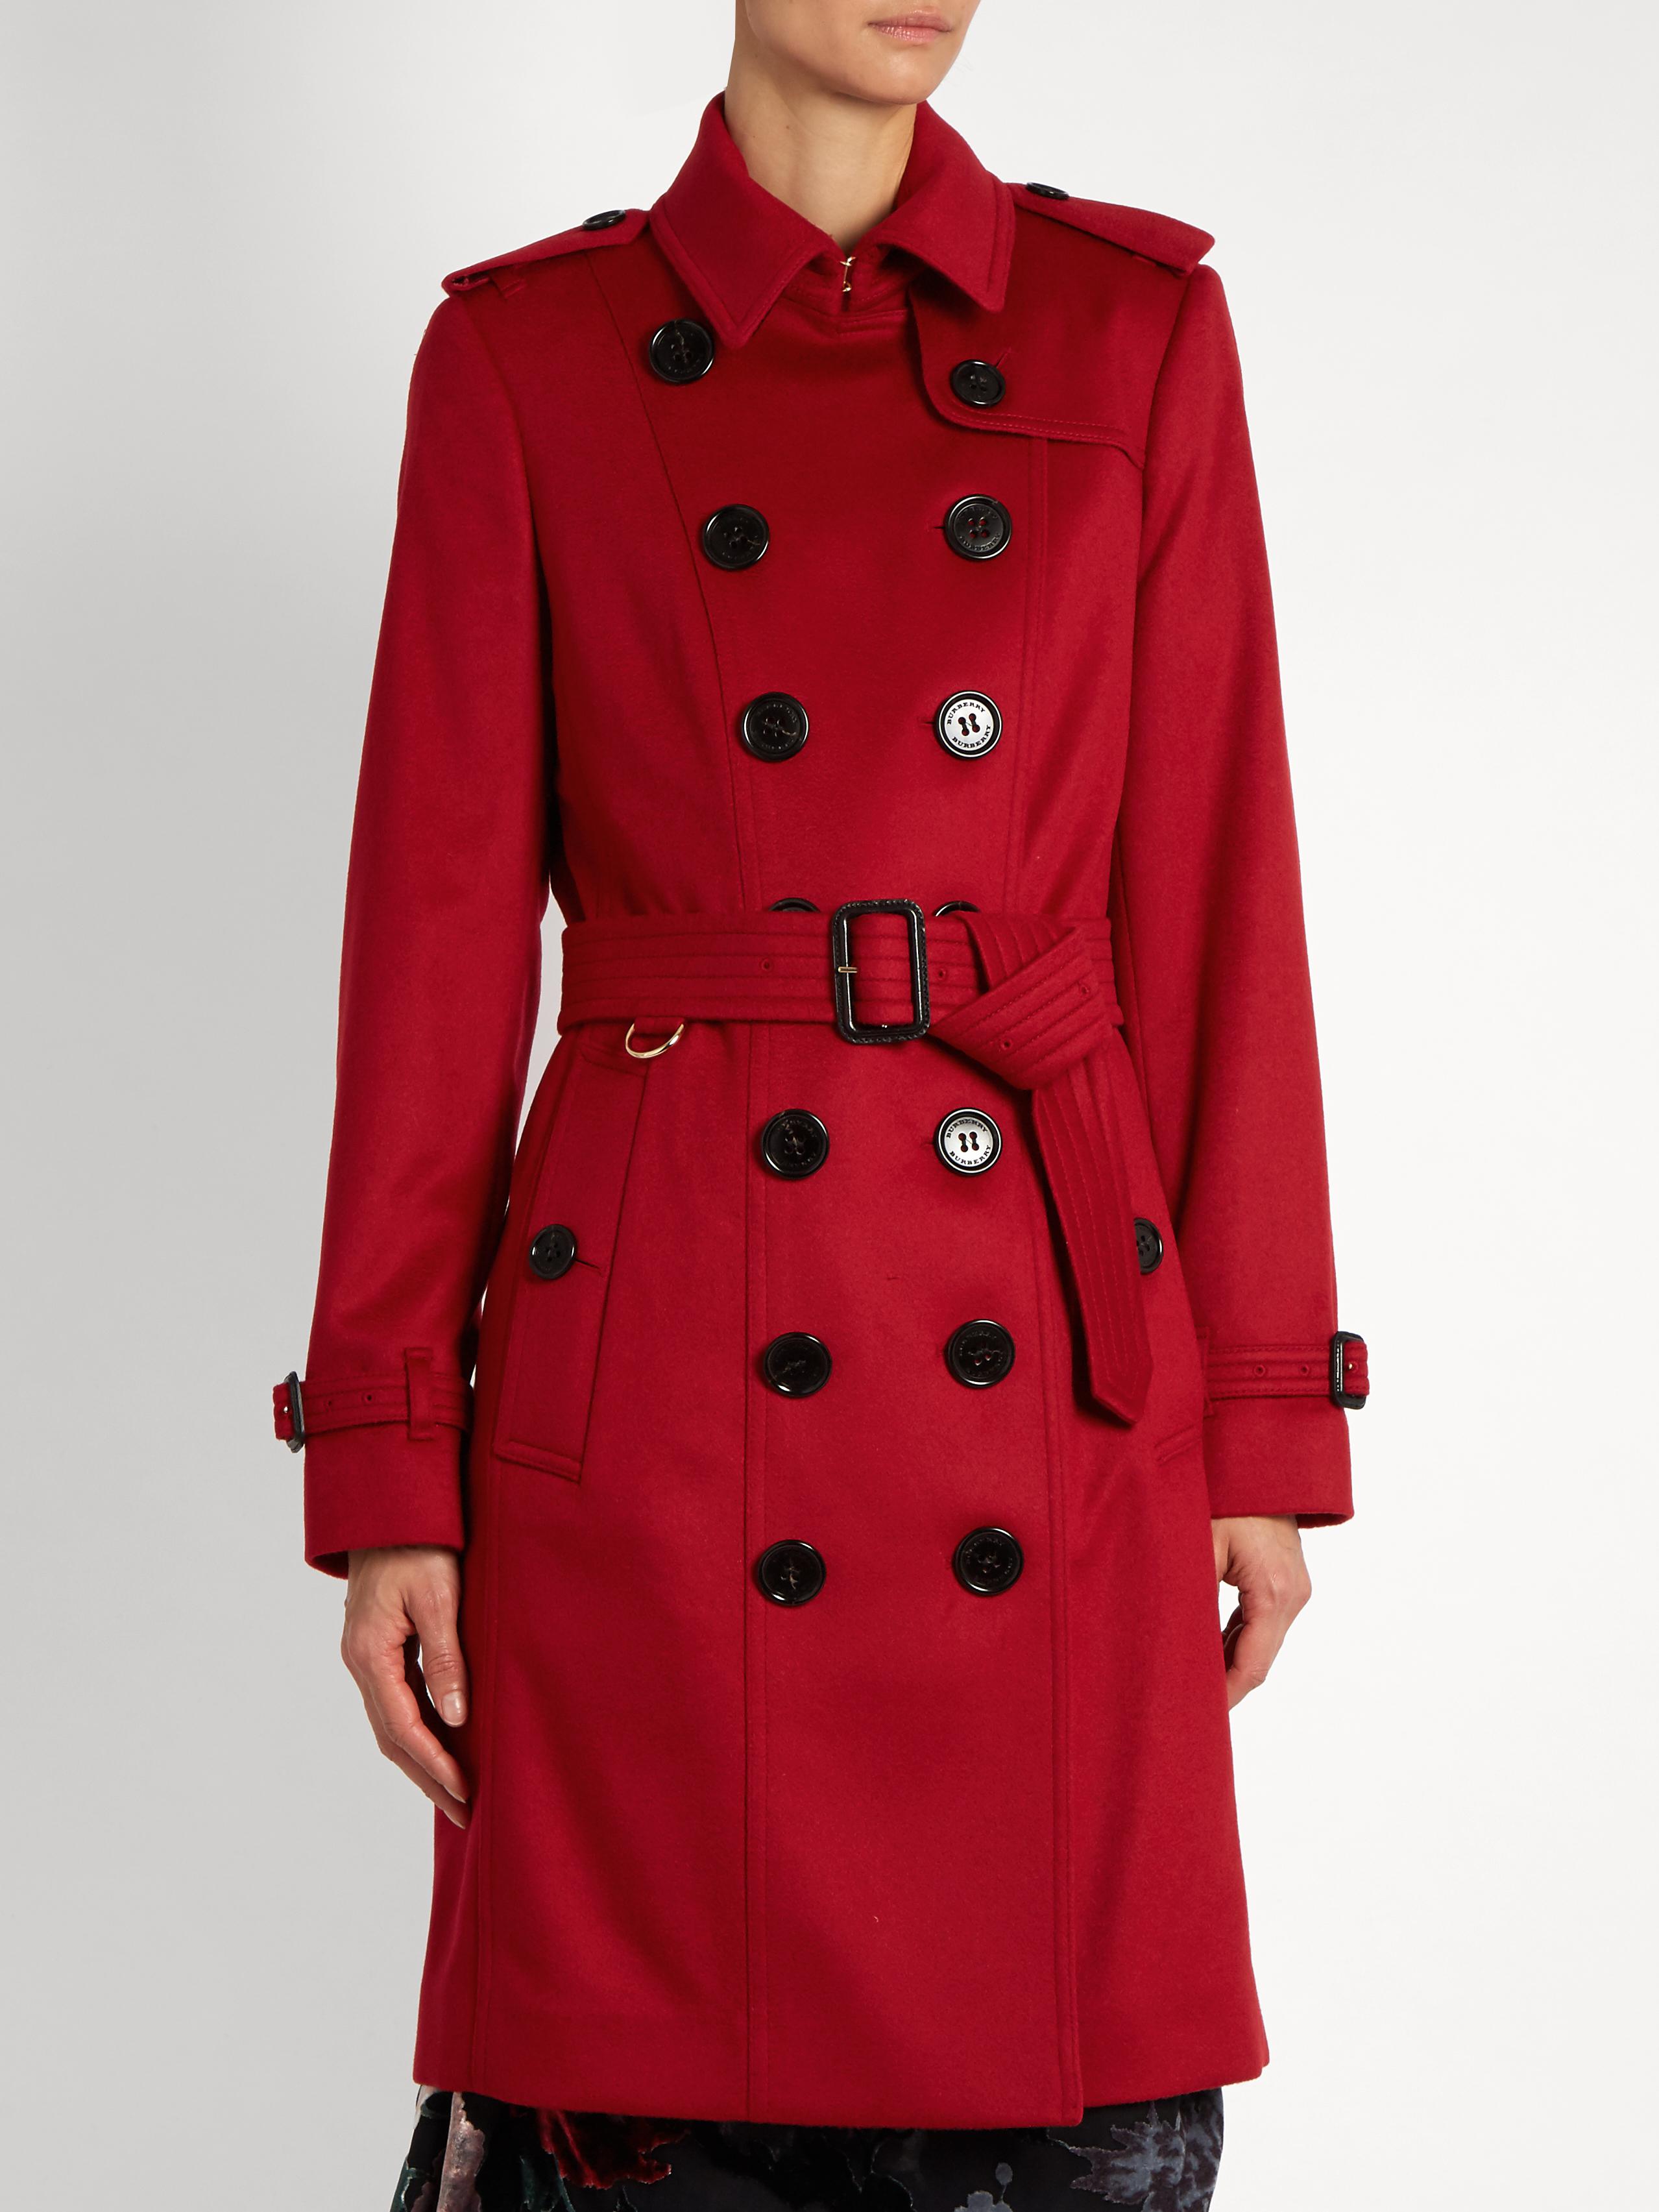 Burberry Sandringham Long Cashmere Trench Coat in Red - Lyst